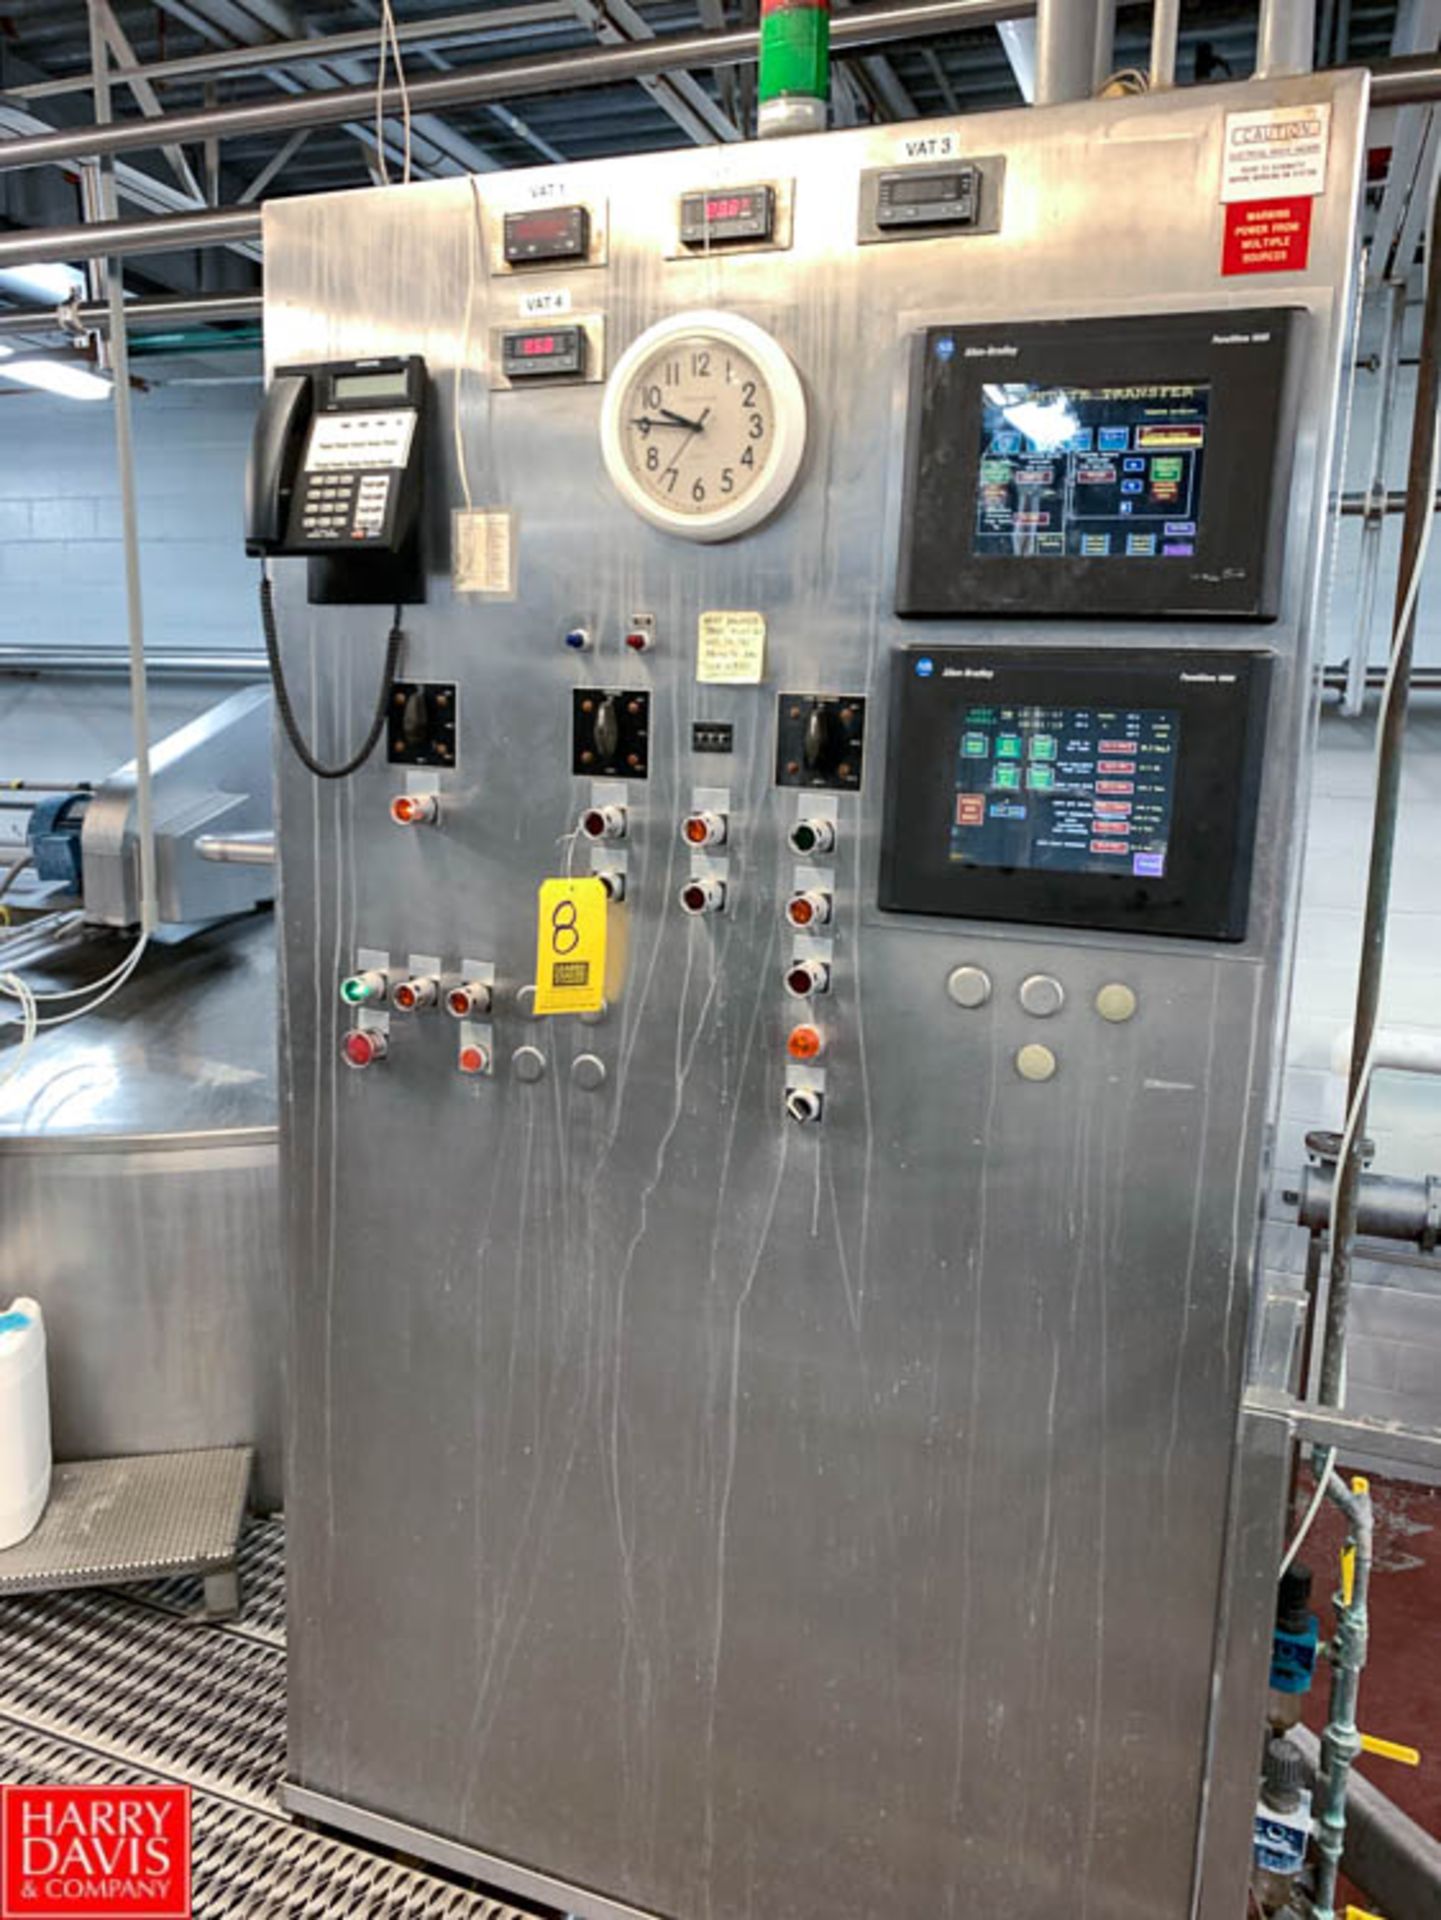 S/S "OO" Cheese Vat Control Panel with (2) Allen Bradley Panel View 1000 Touch Screen Controls, Used